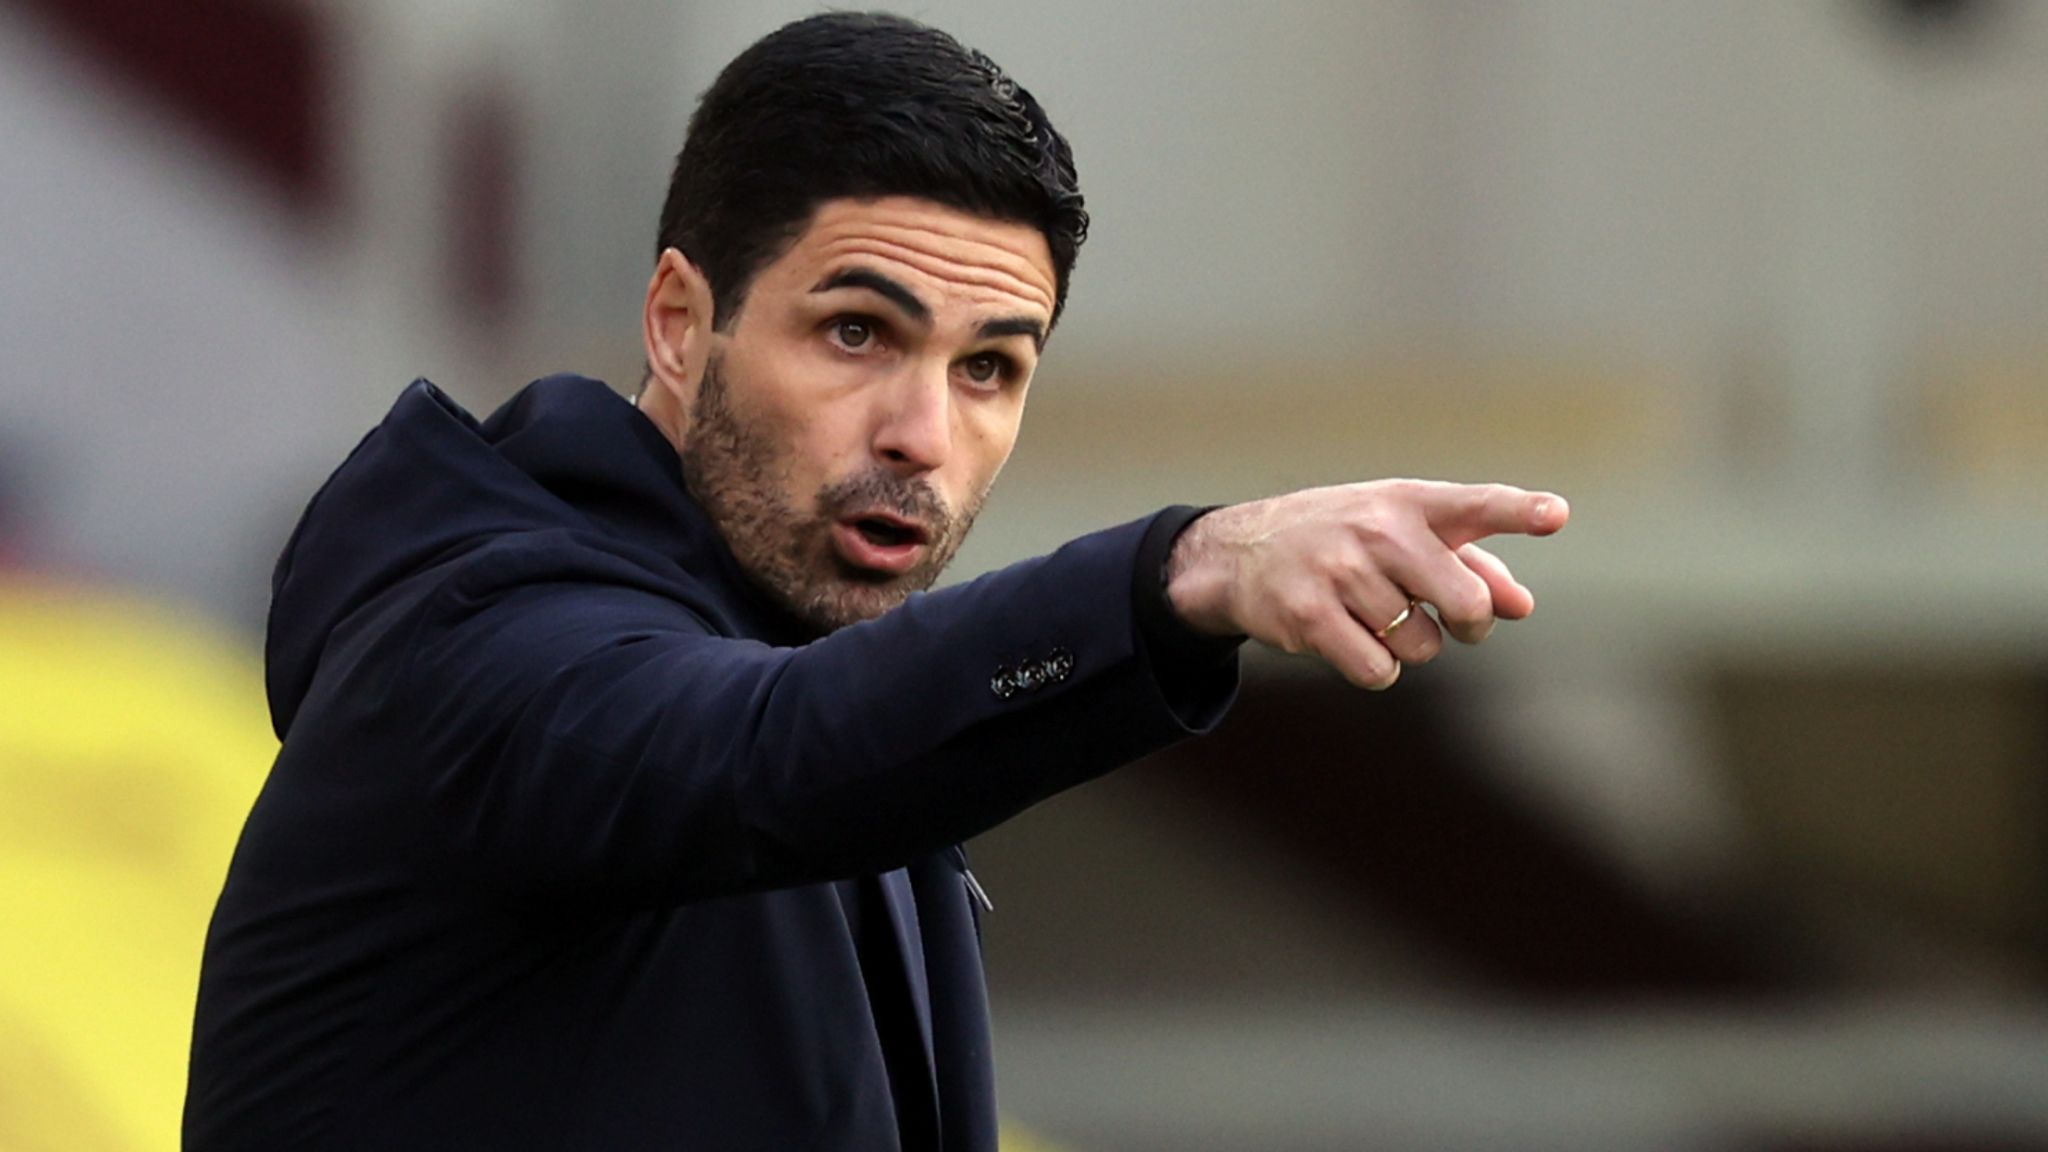 Arsenal's Defeat By Liverpool Leaves the Club's Manager Mikel Arteta Shocked